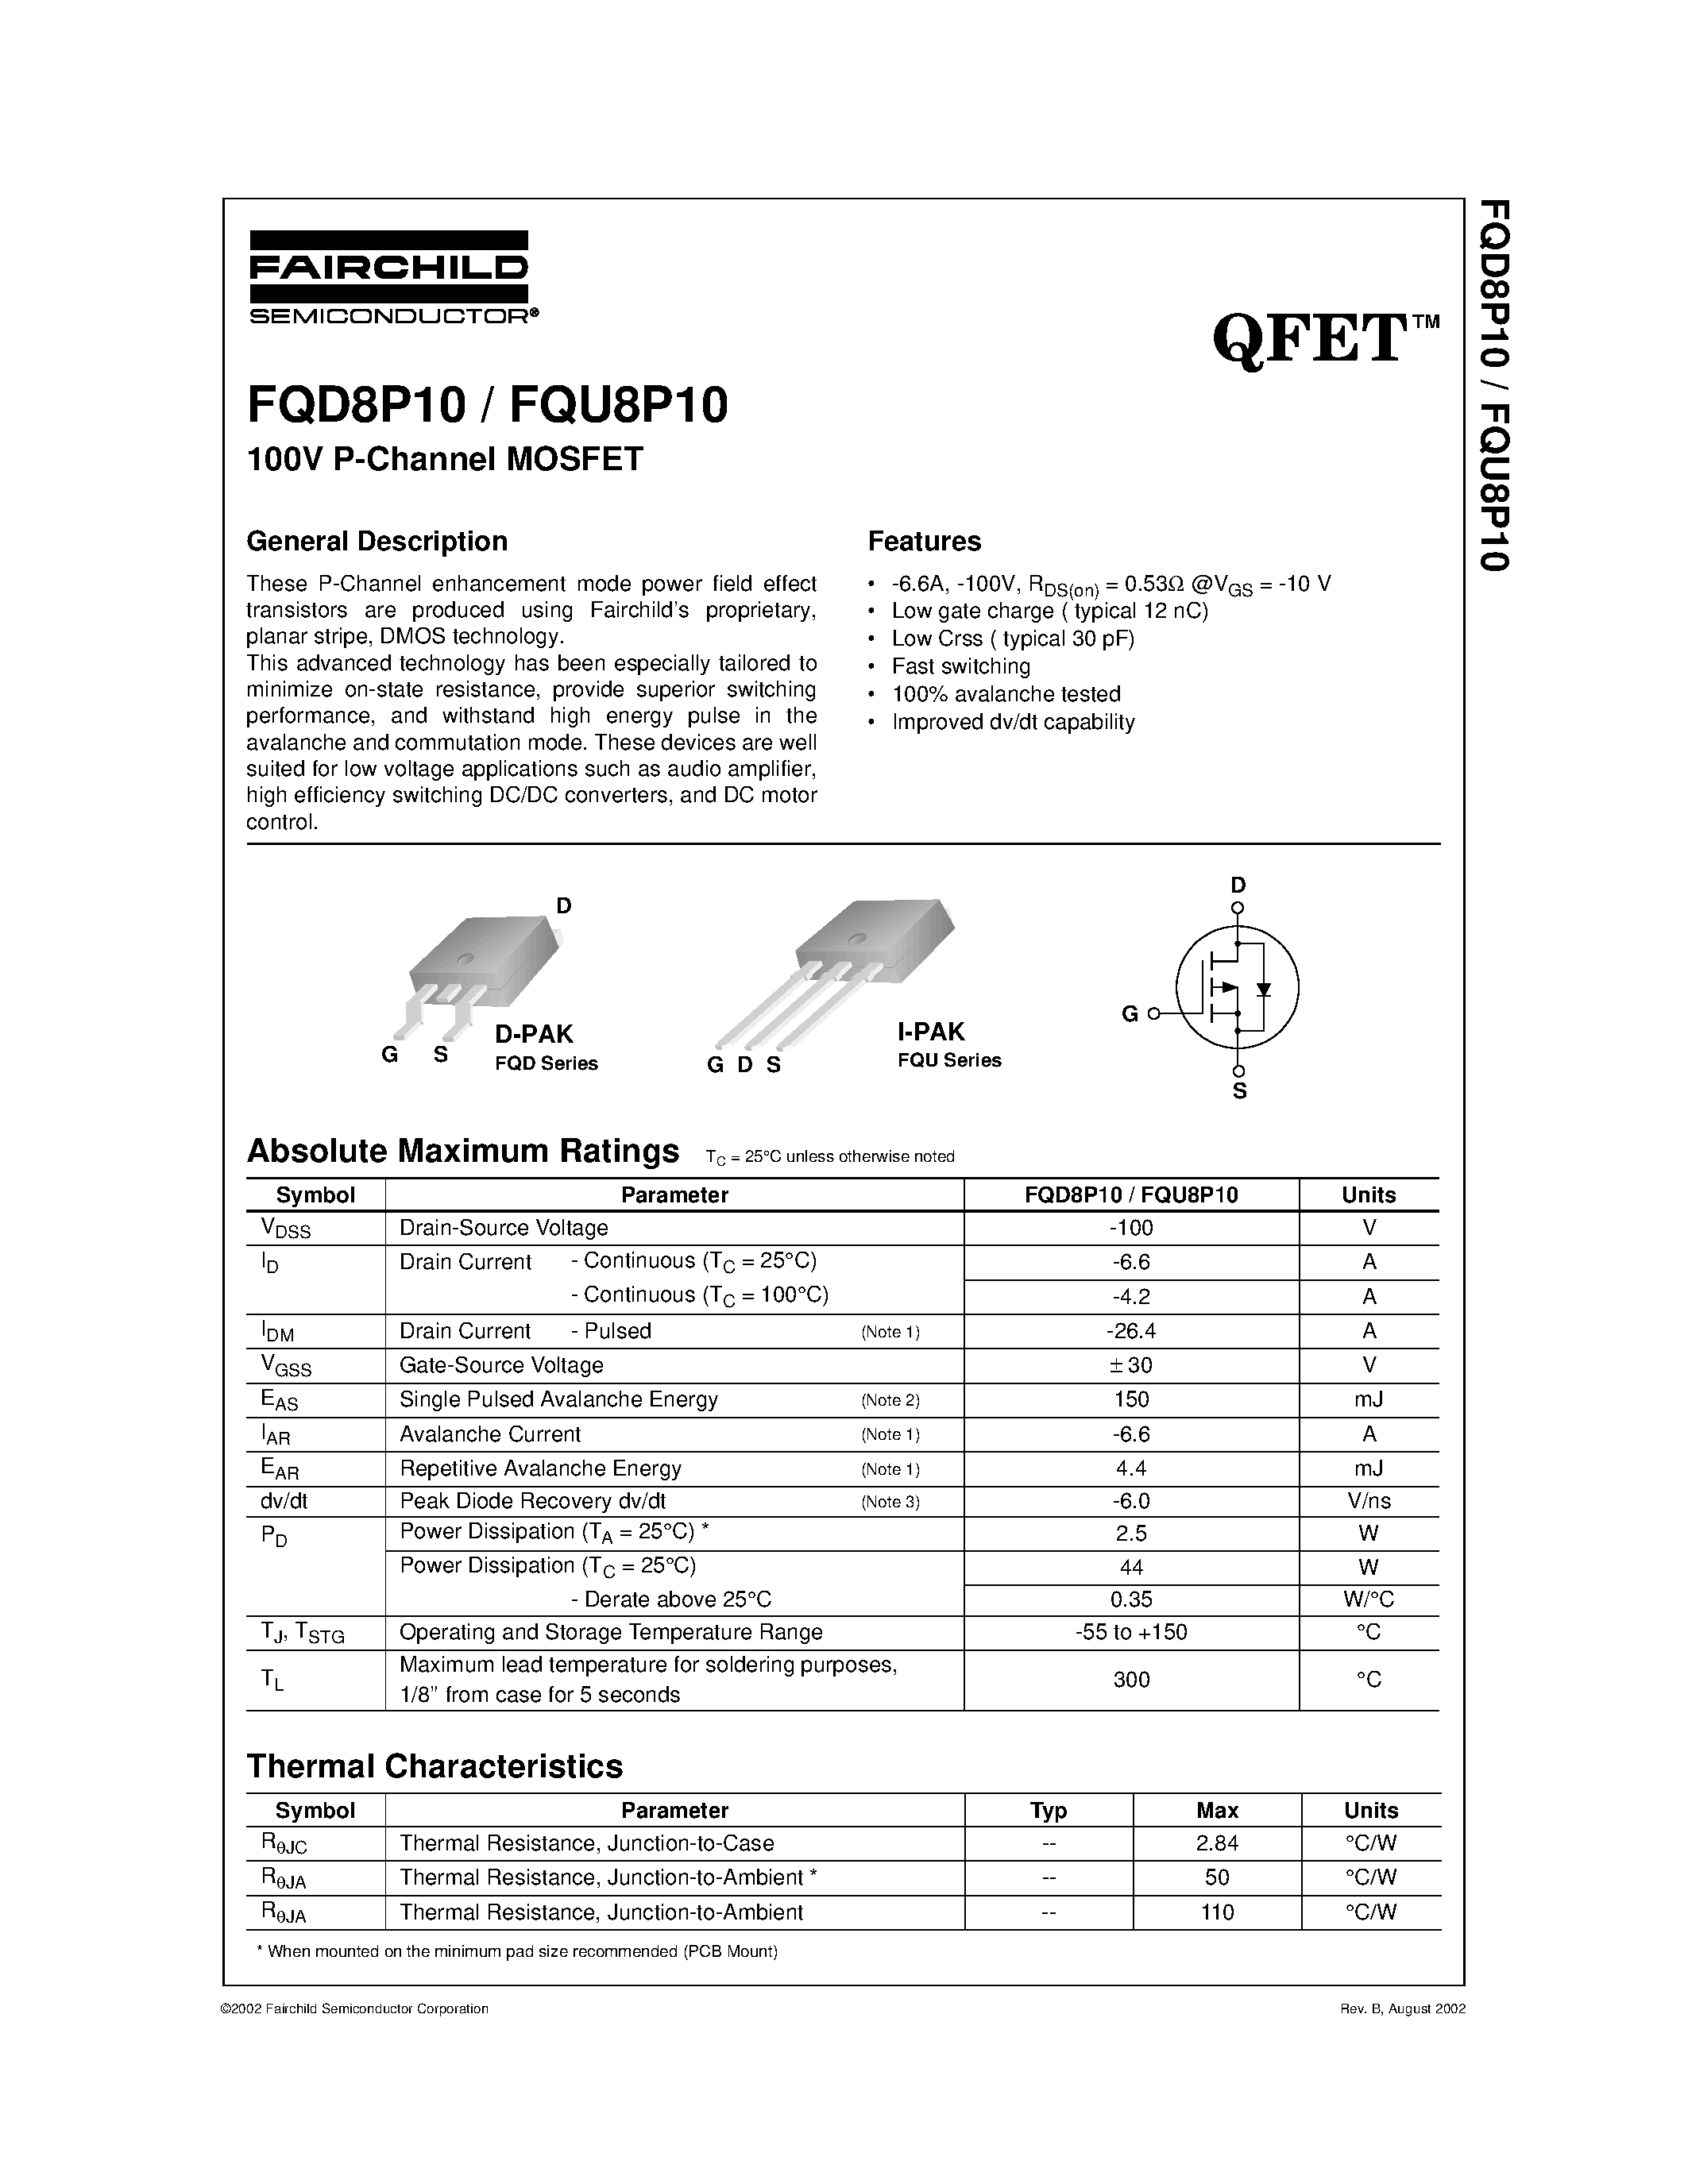 Datasheet FQD8P10 - 100V P-Channel MOSFET page 1